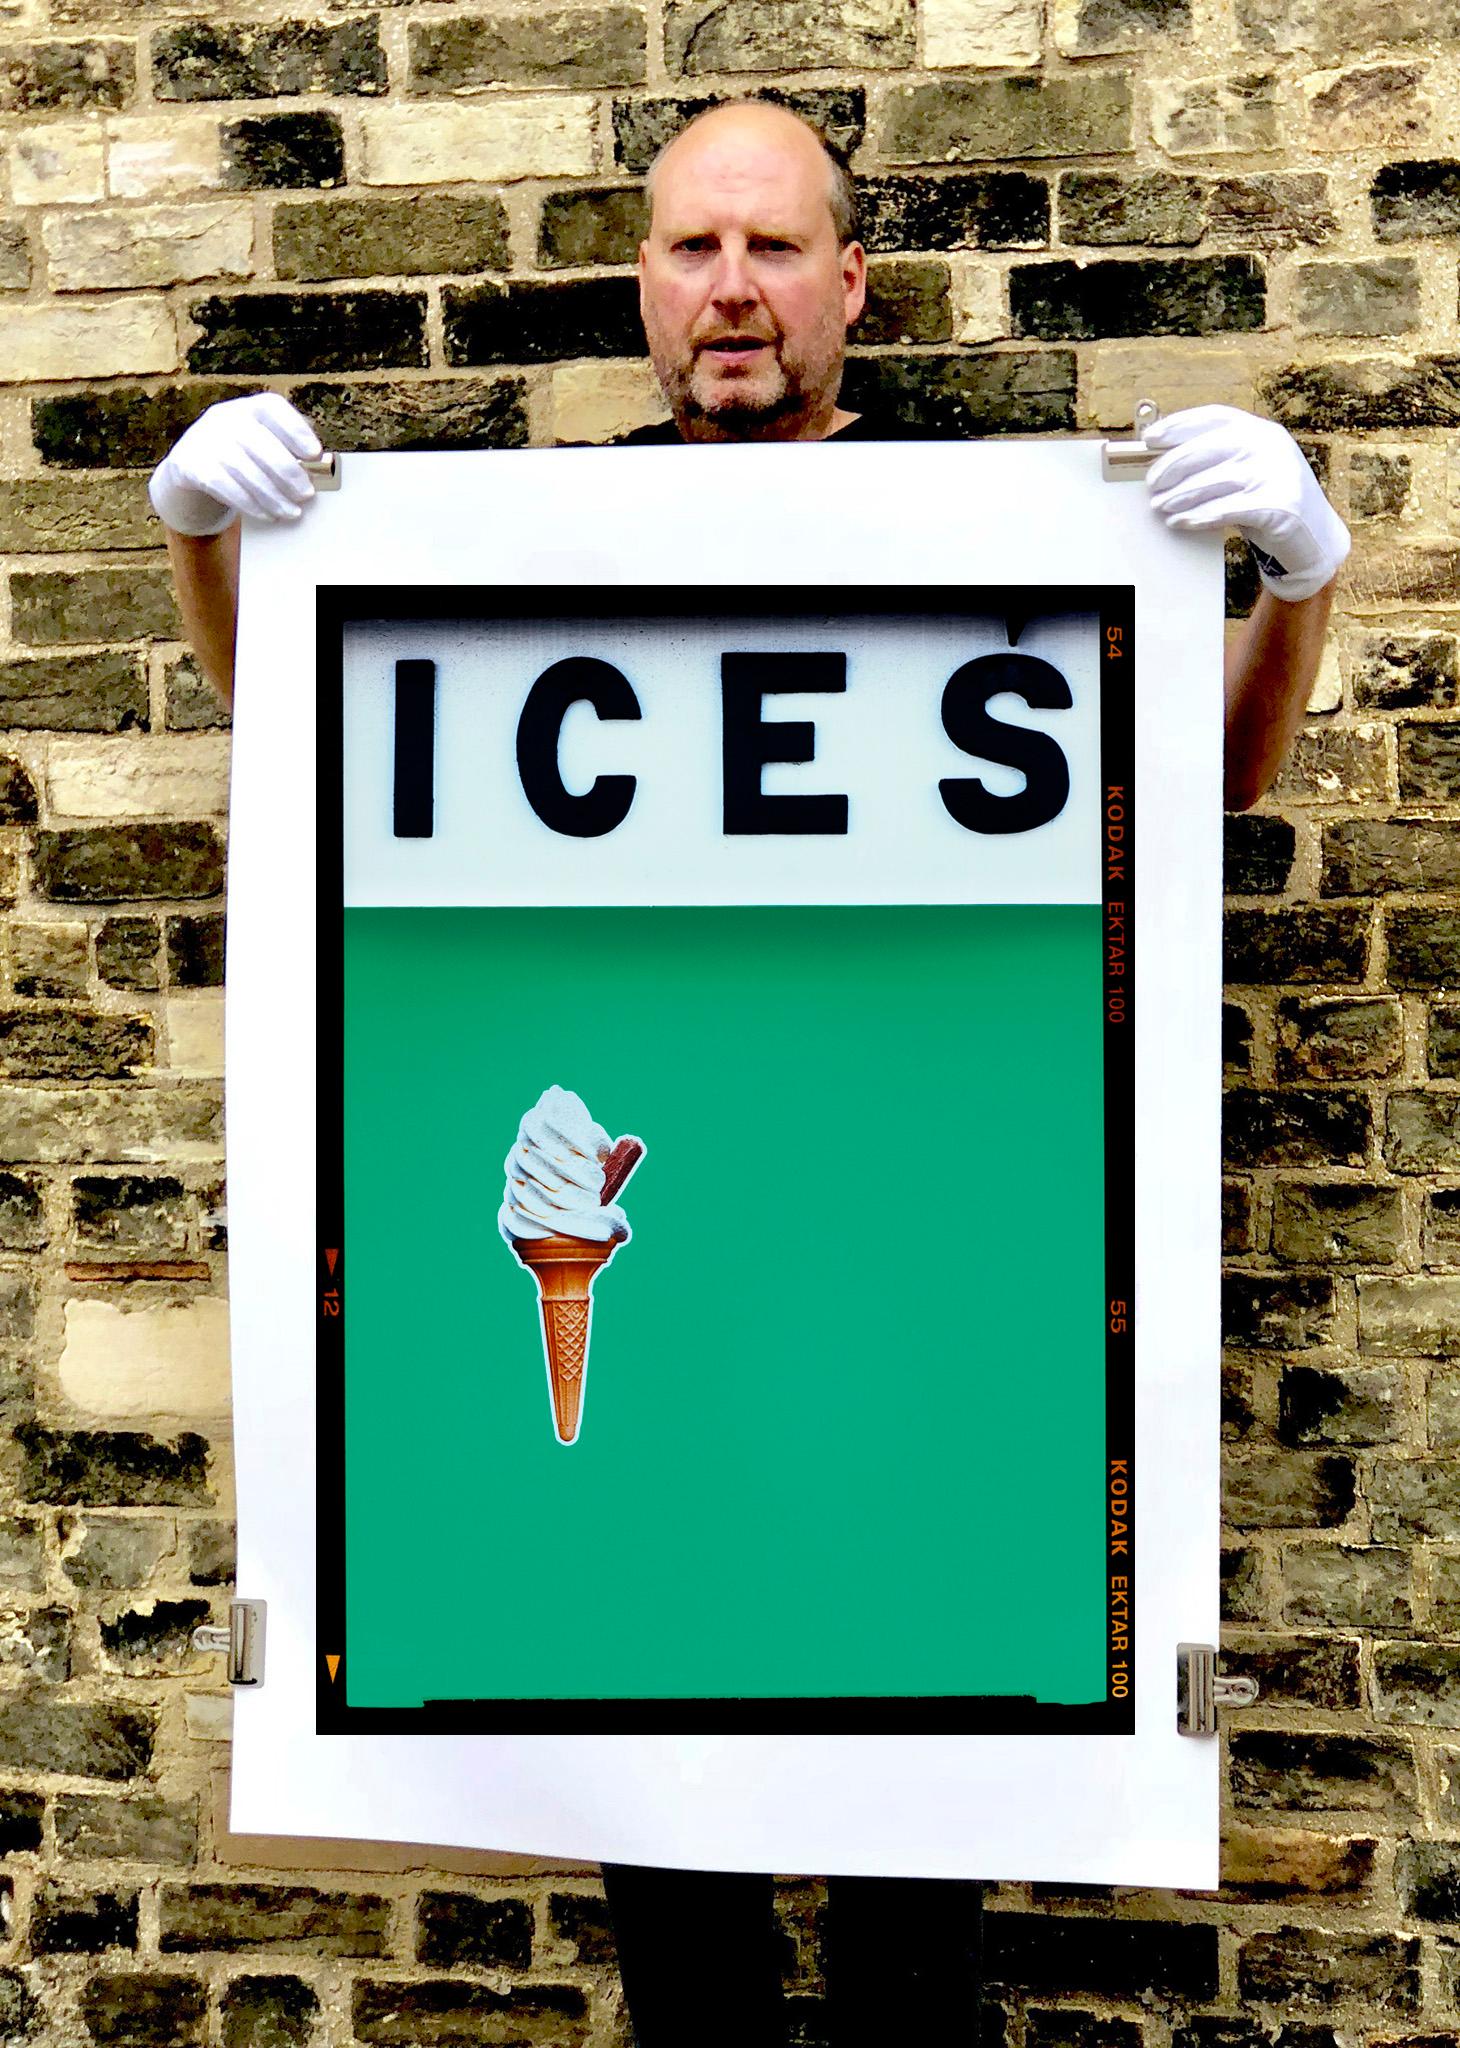 ICES (Viridian Green), Bexhill-on-Sea - British seaside color photography - Print by Richard Heeps